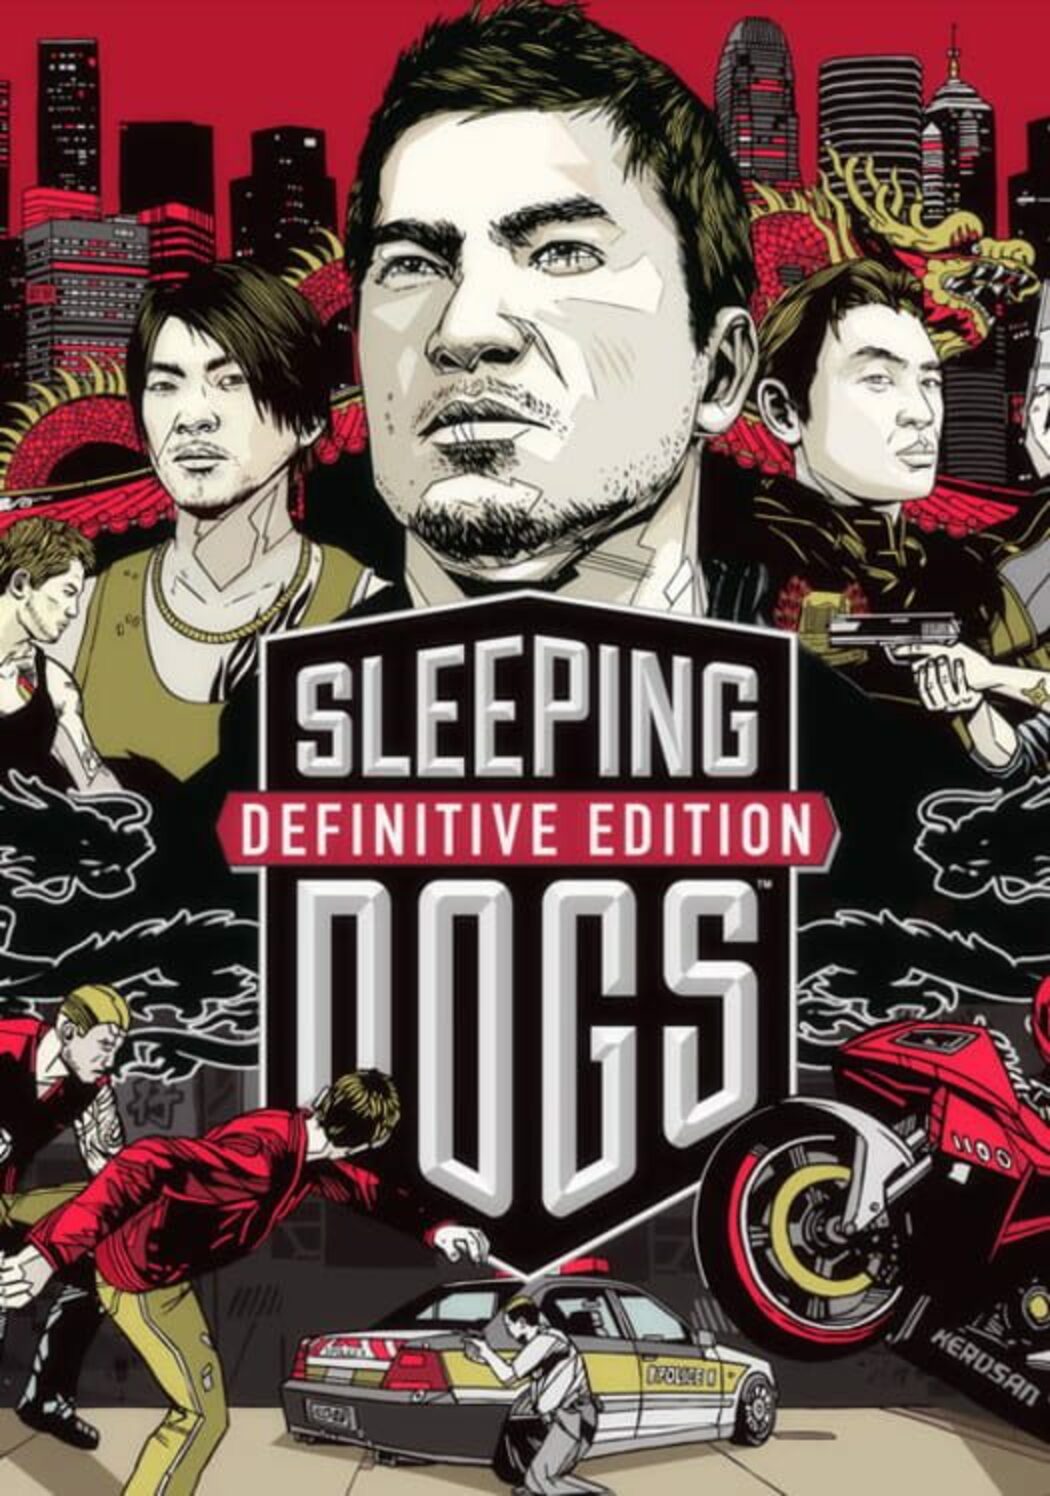 Sleeping Dogs Definitive Edition - PC - Compre na Nuuvem